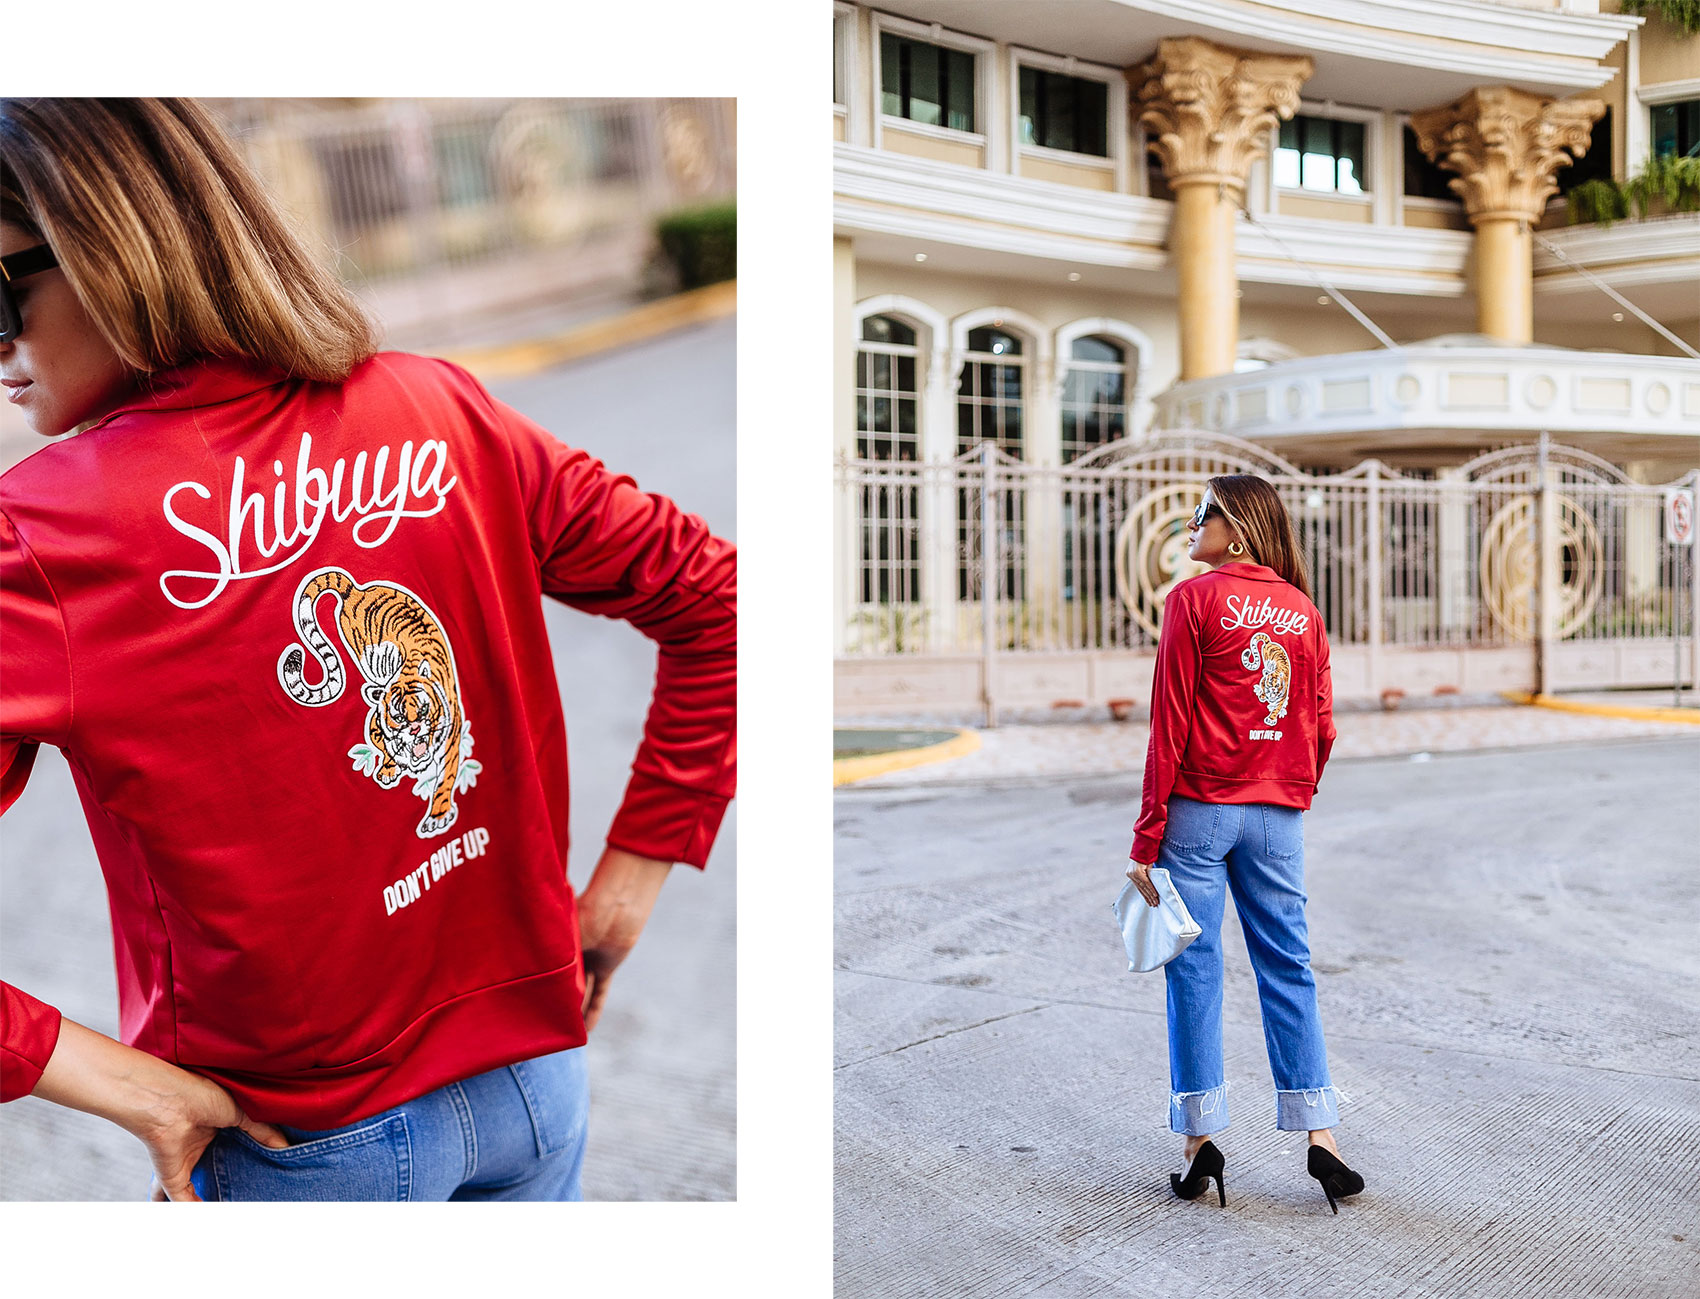 Maristella wears a Zara red satin jacket with embroidered tiger, jeans and black pumps